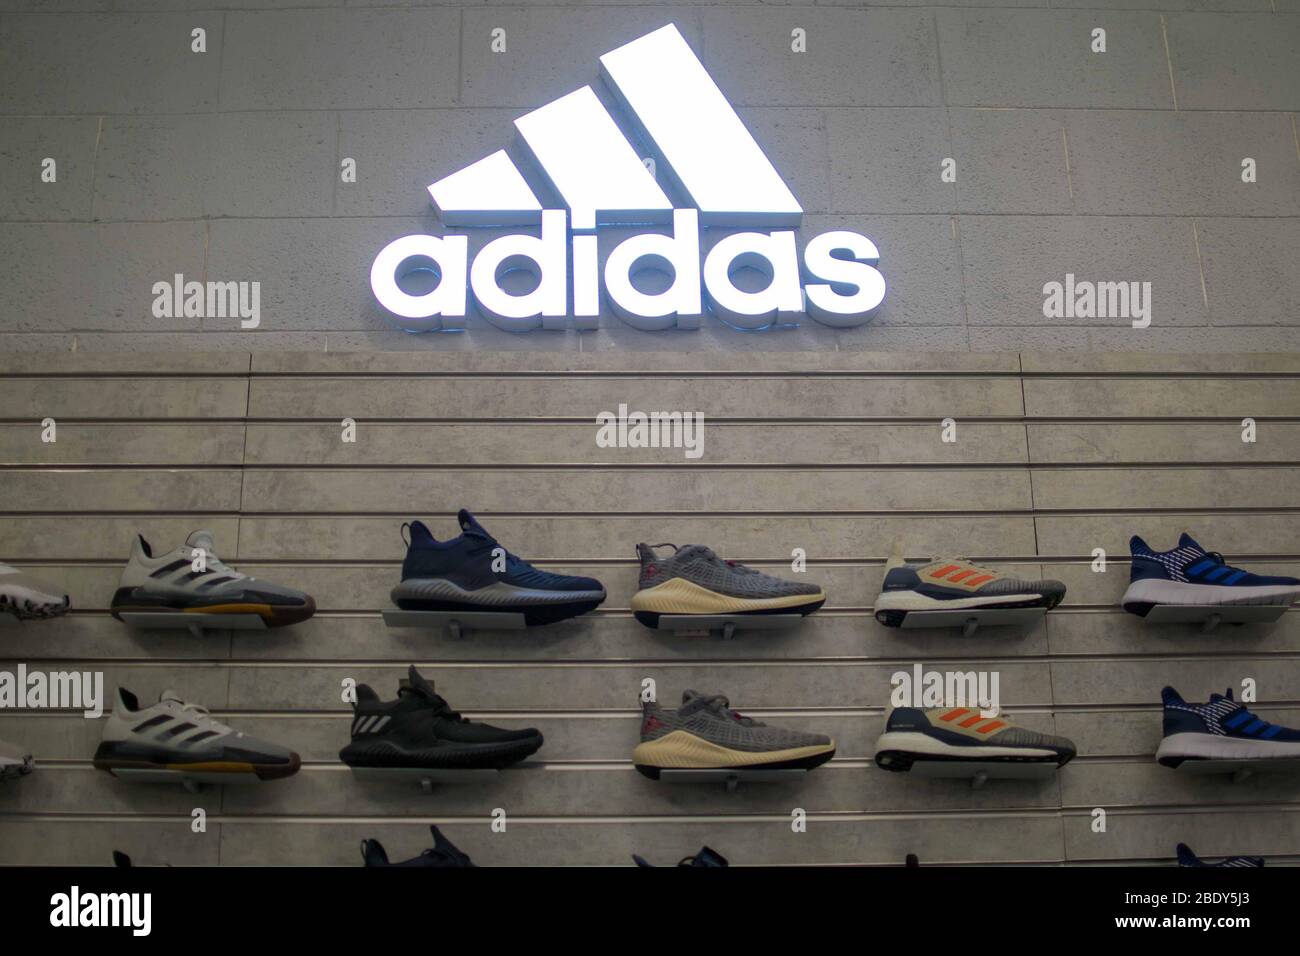 NOV. 2019-BAGUIO CITY PHILIPPINES : Adidas shoes on display for with the Adidas logo on top Stock Photo Alamy